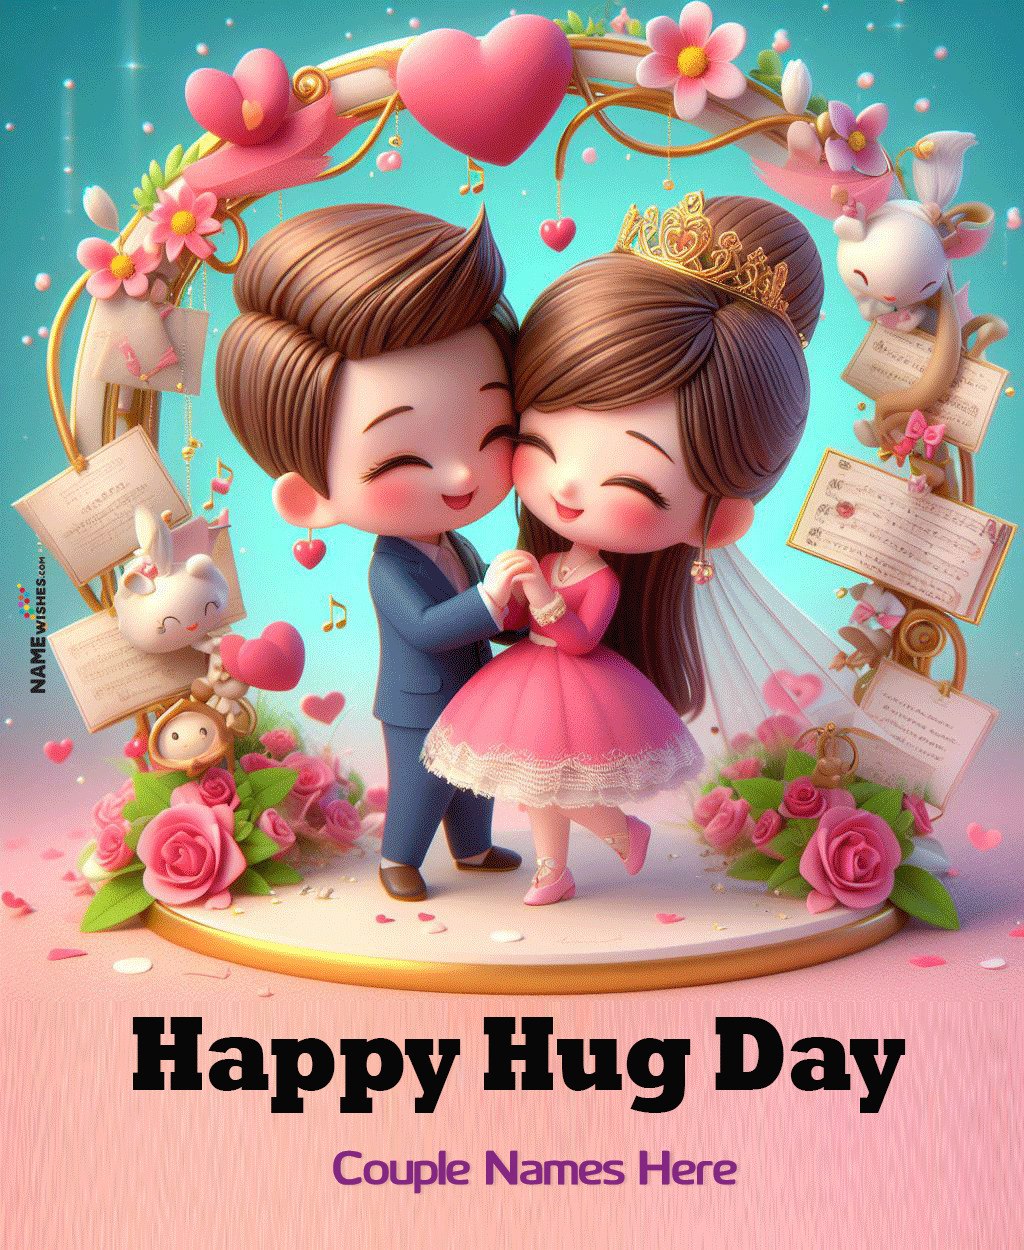 Happy Hug Day Wishes Images and Pictures